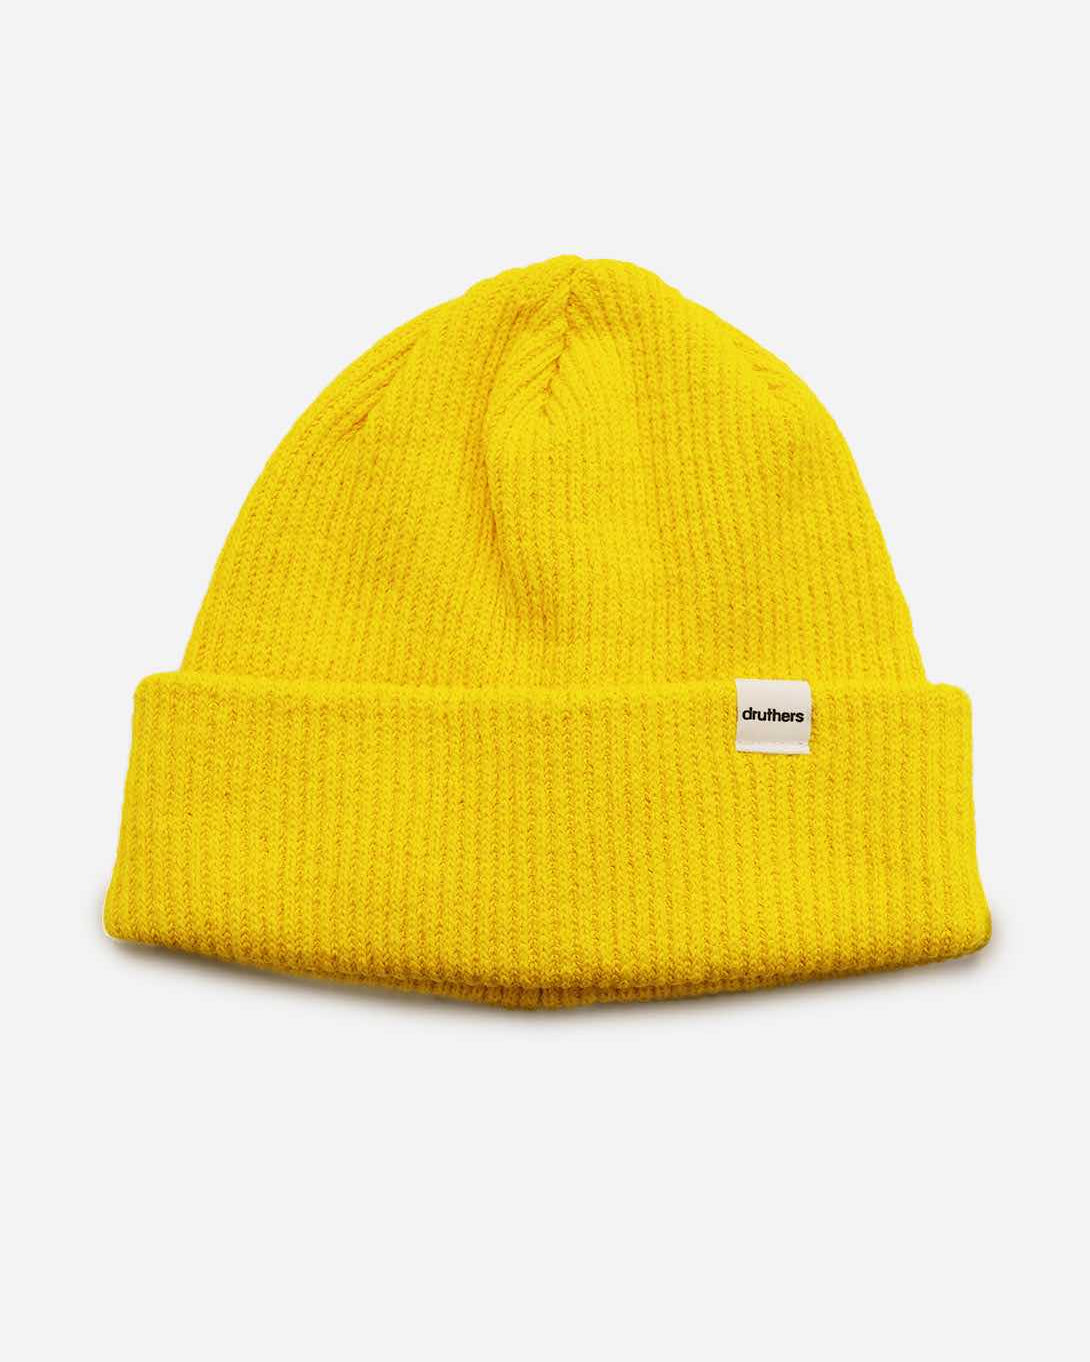 Sunflower ONS Clothing Men's Druthers Knit Beanie